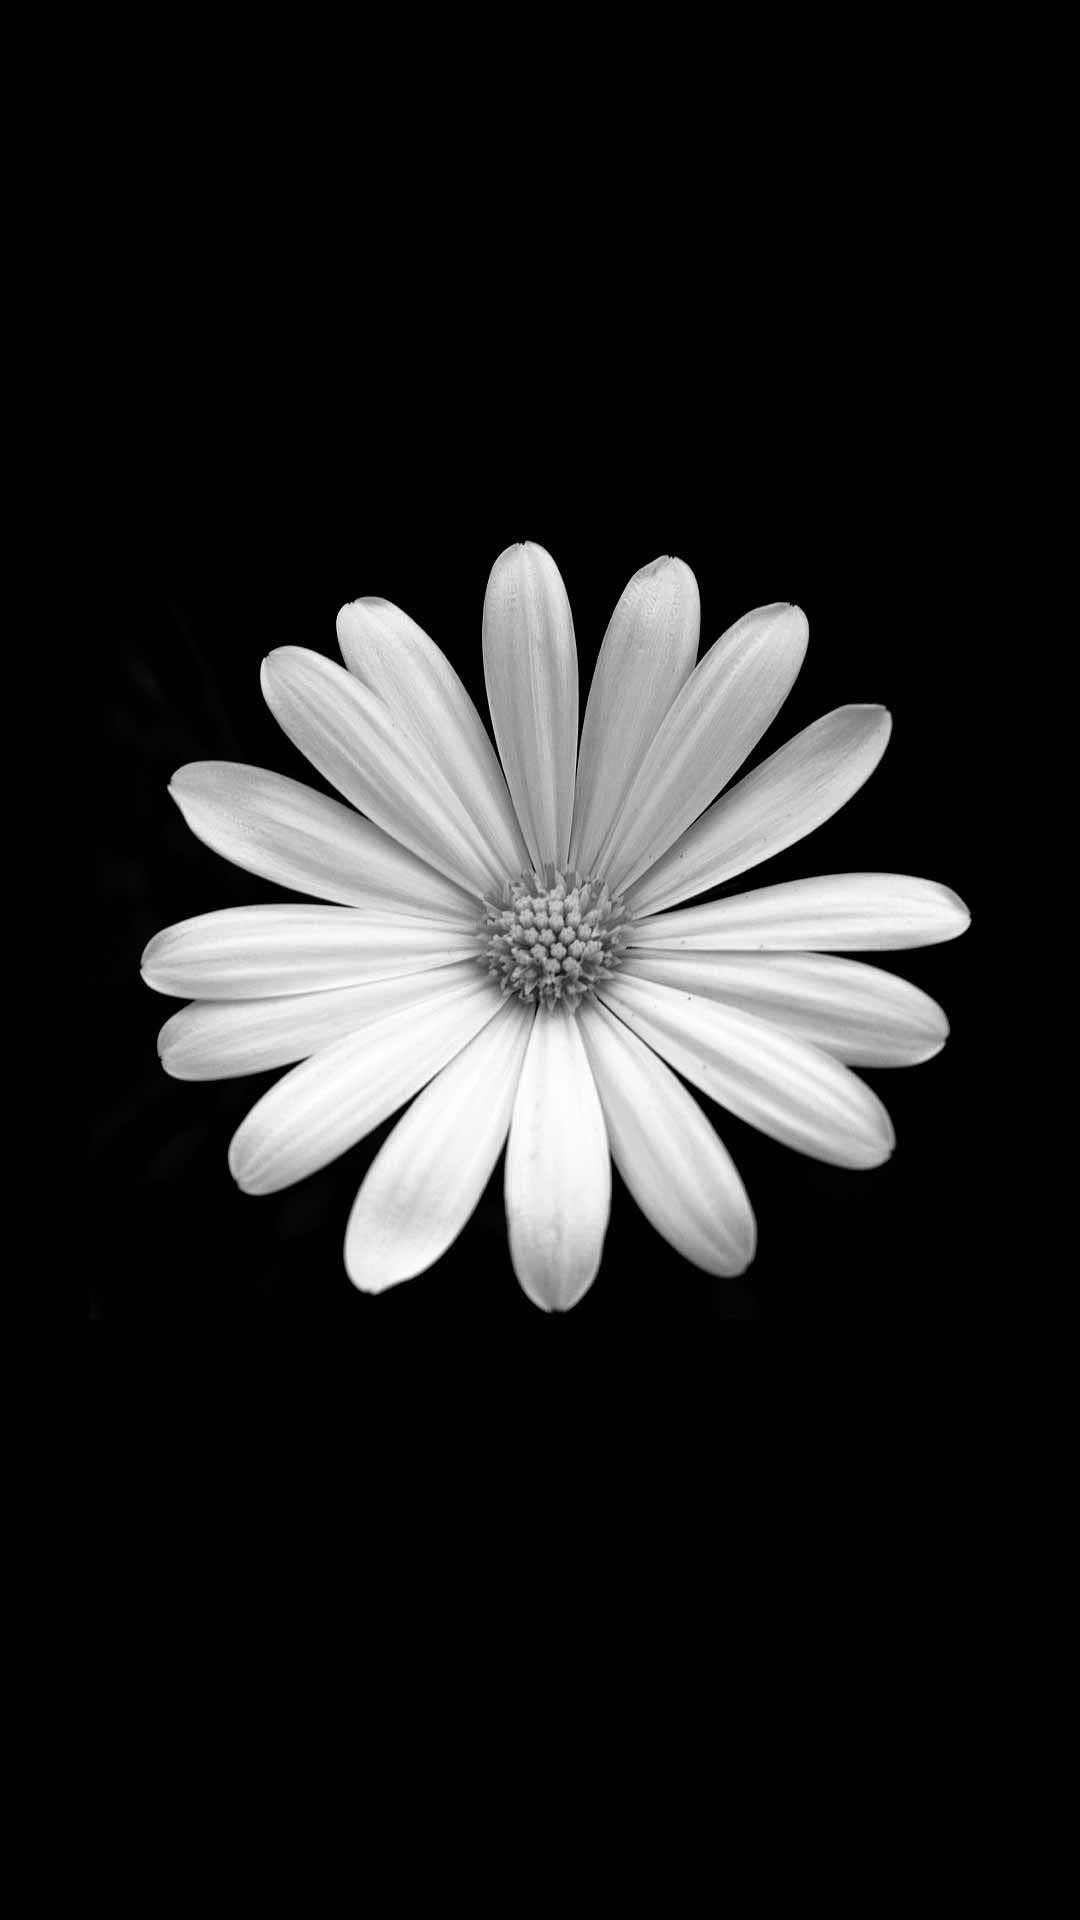 A black and white photo of daisy flower - Daisy